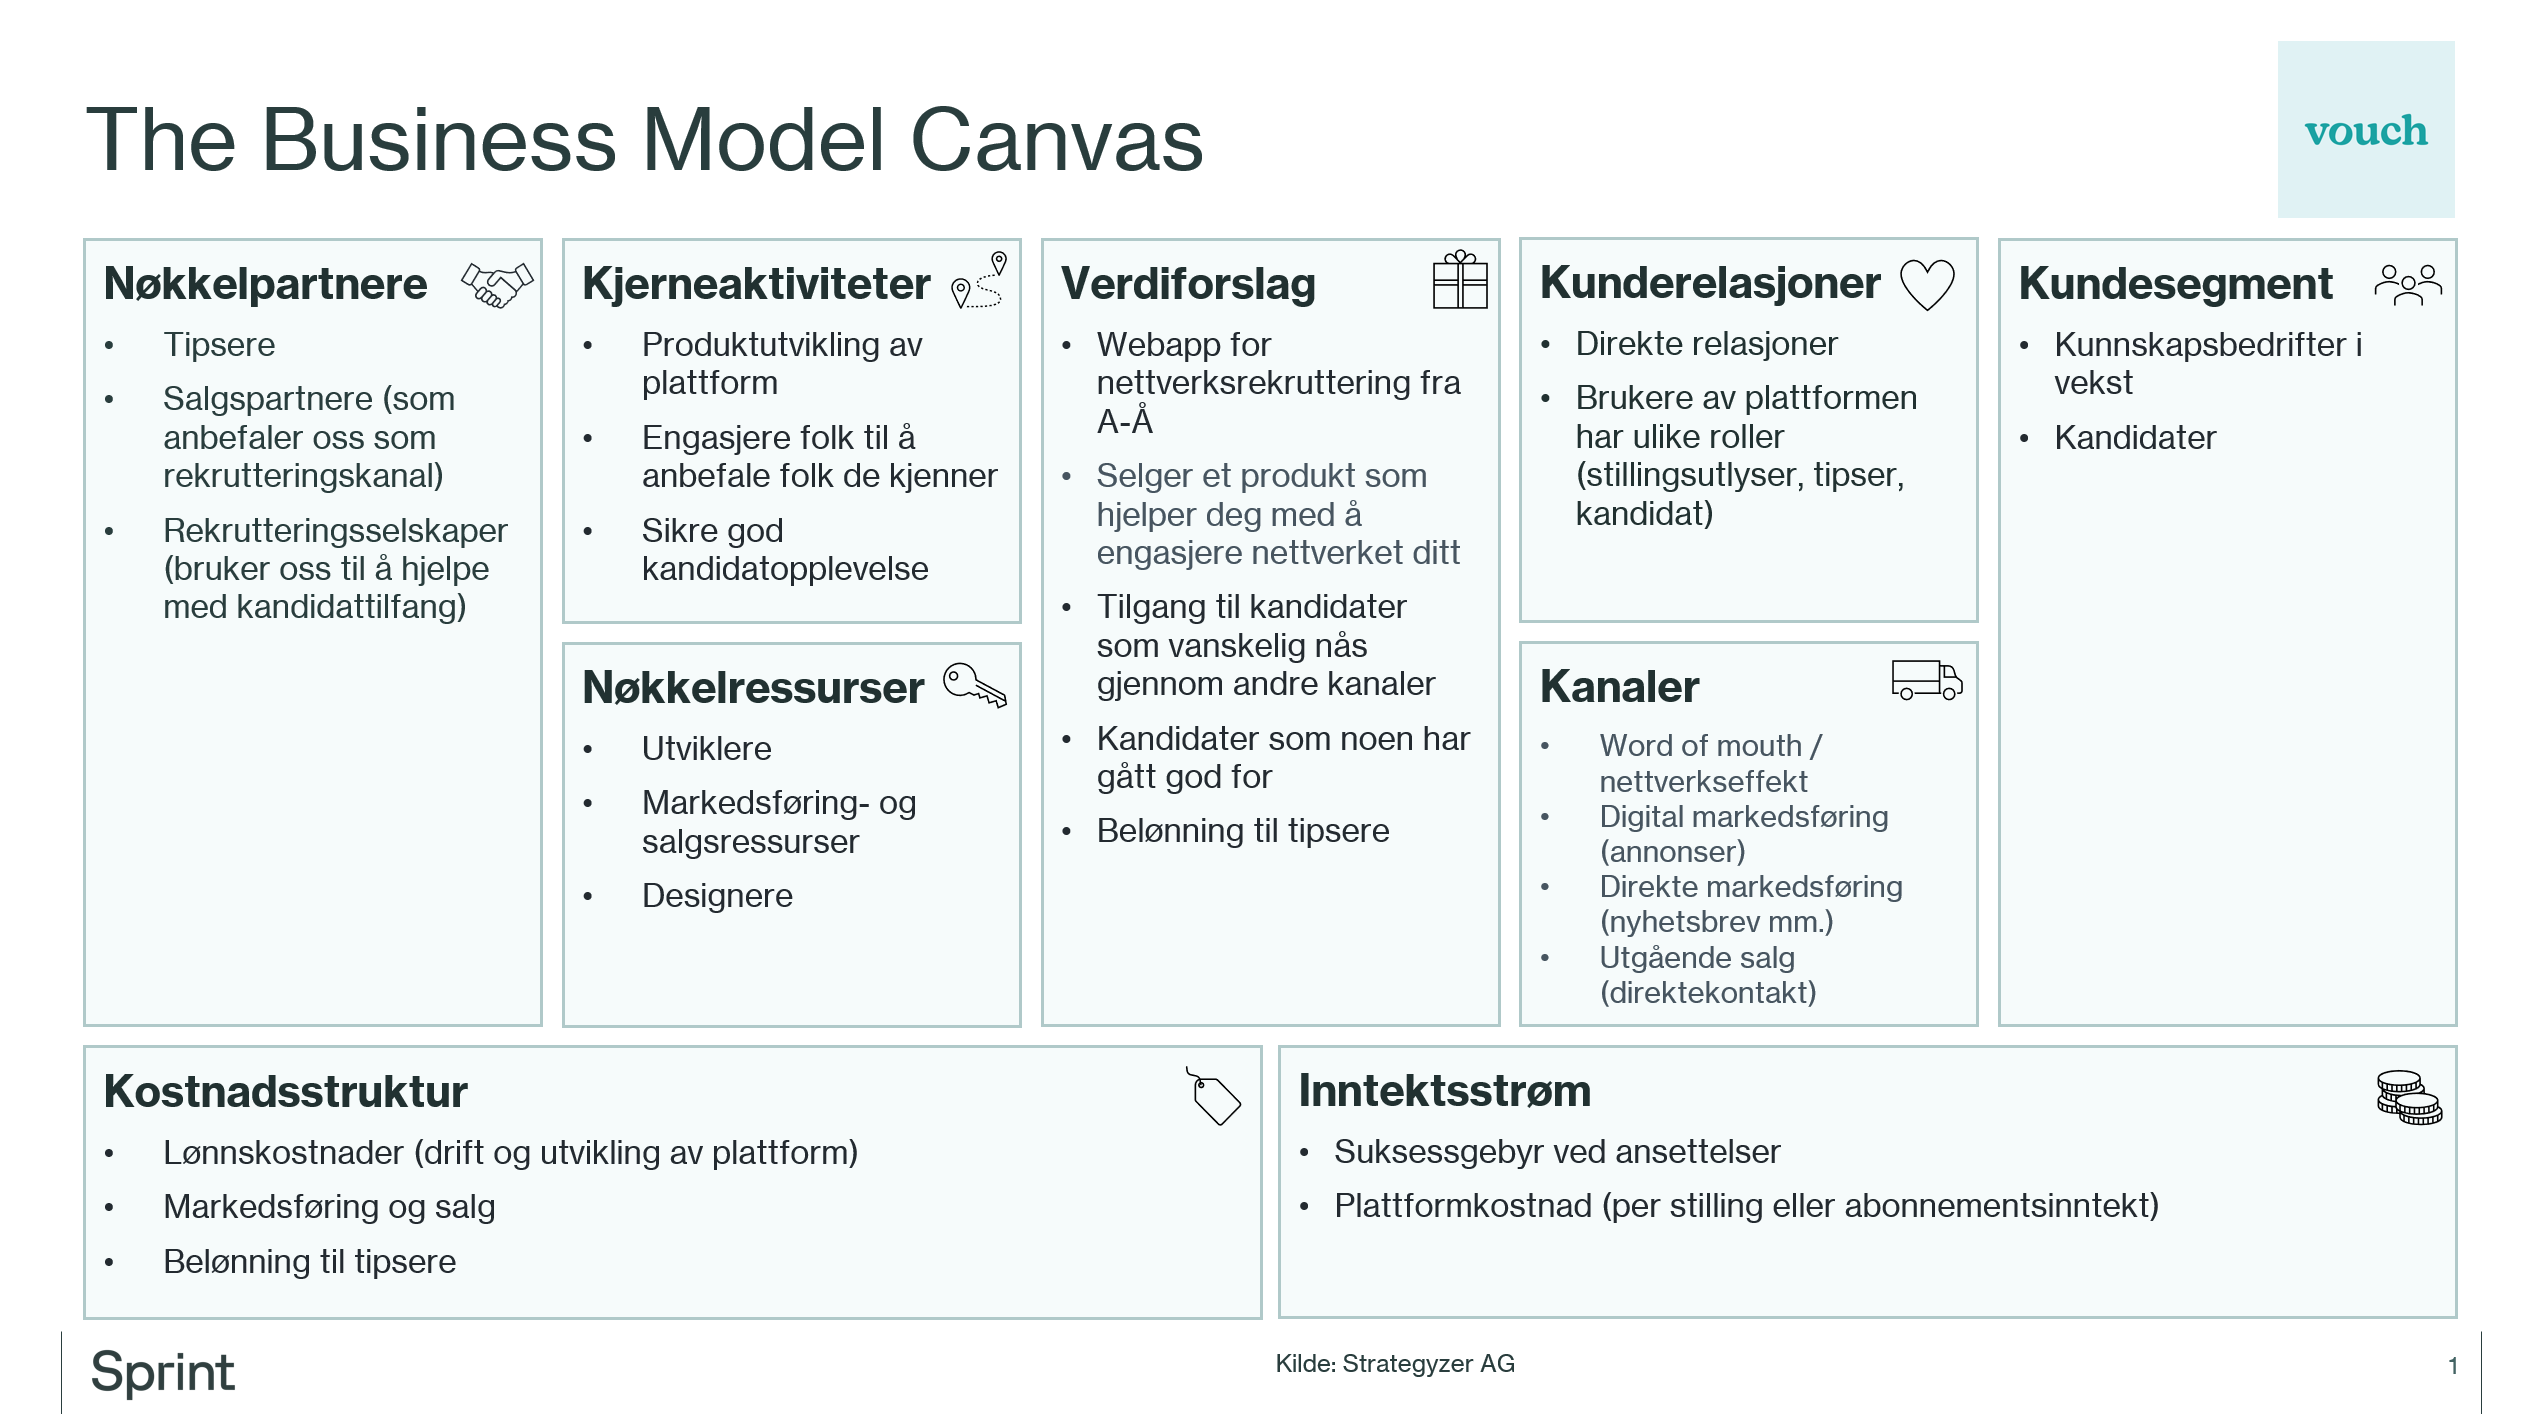 Business model canvas for Vouch